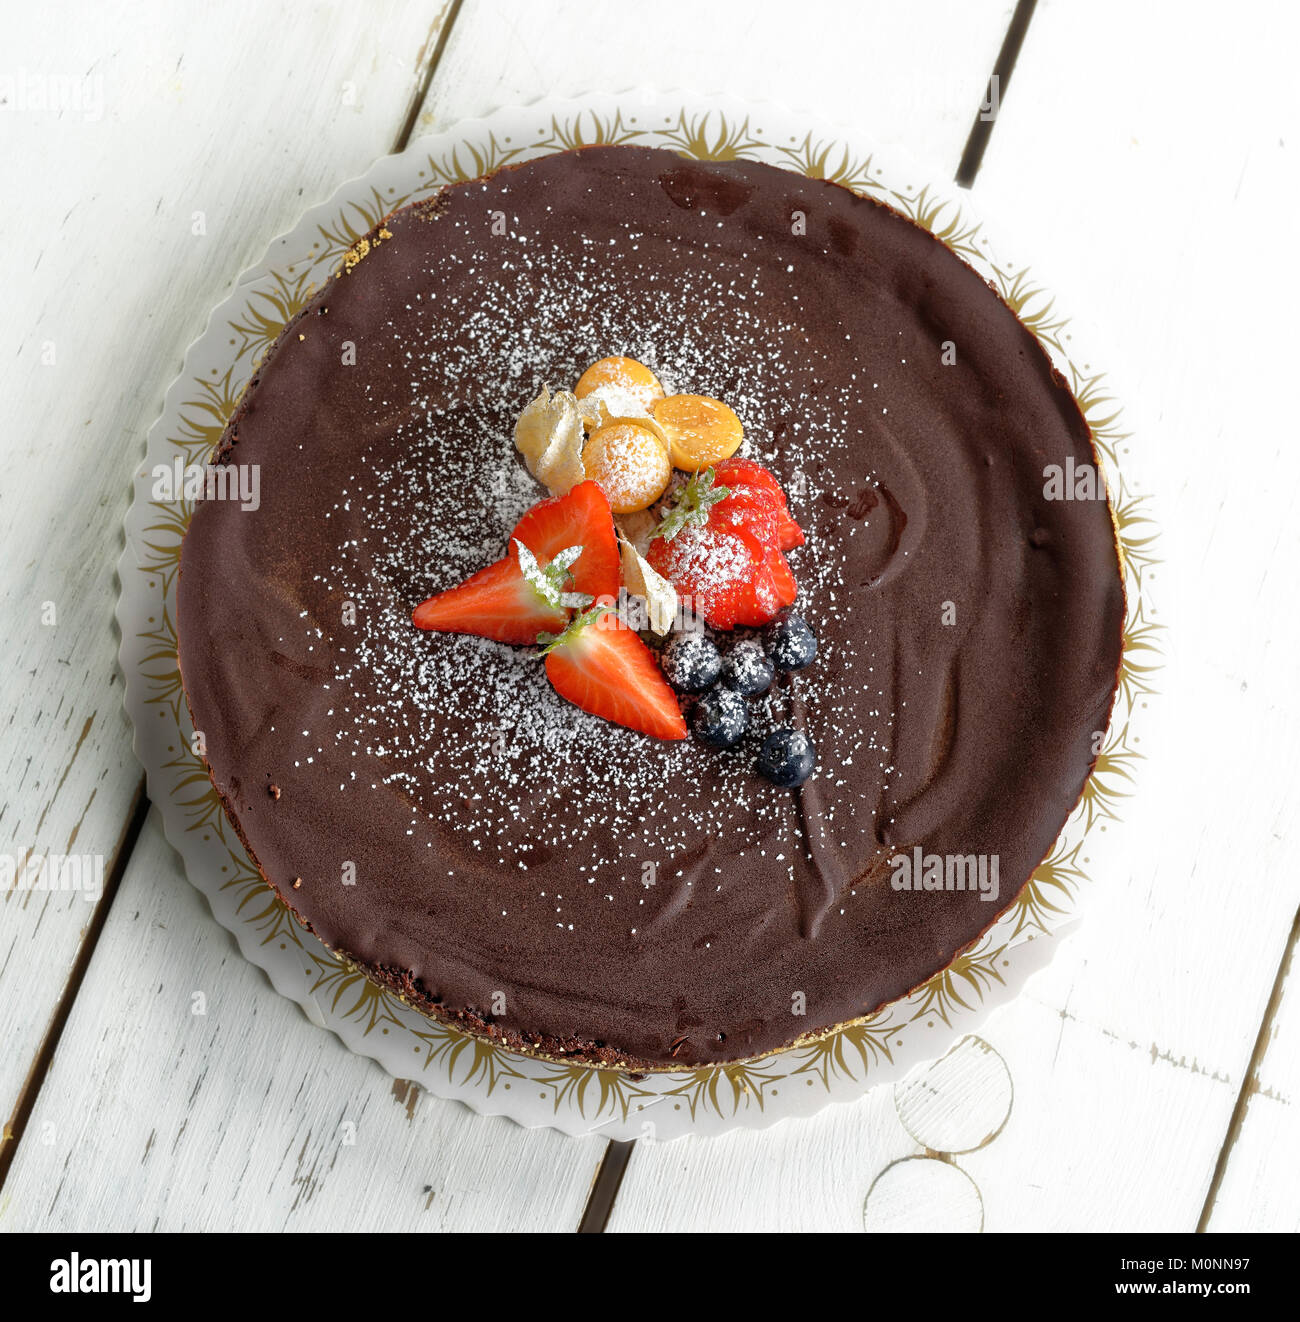 Chocolate cake with strawberries and blueberries Stock Photo